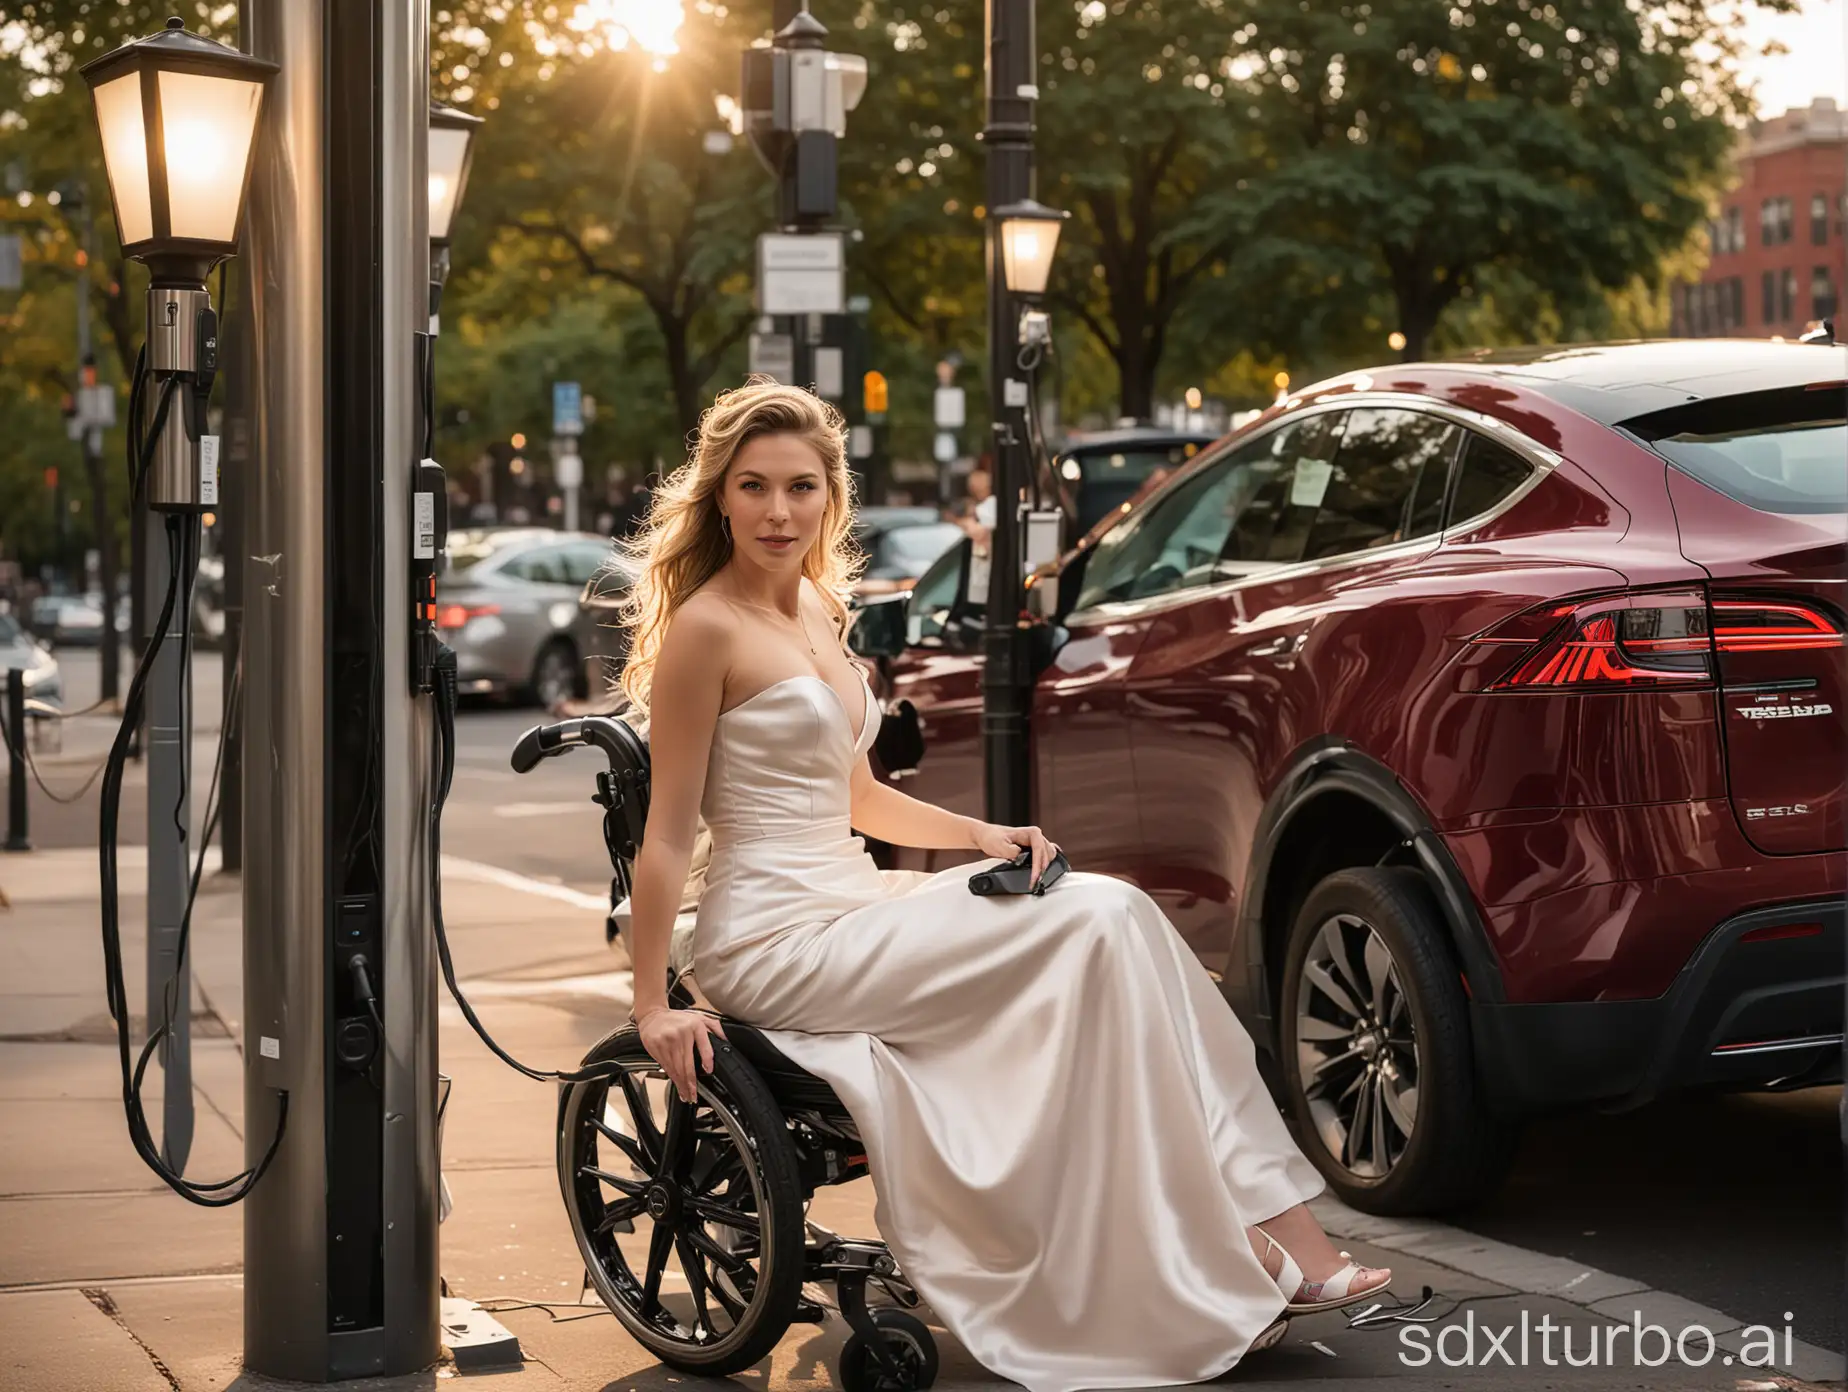 Elegant-Woman-Charging-Electric-Vehicle-at-Sunset-in-New-York-City